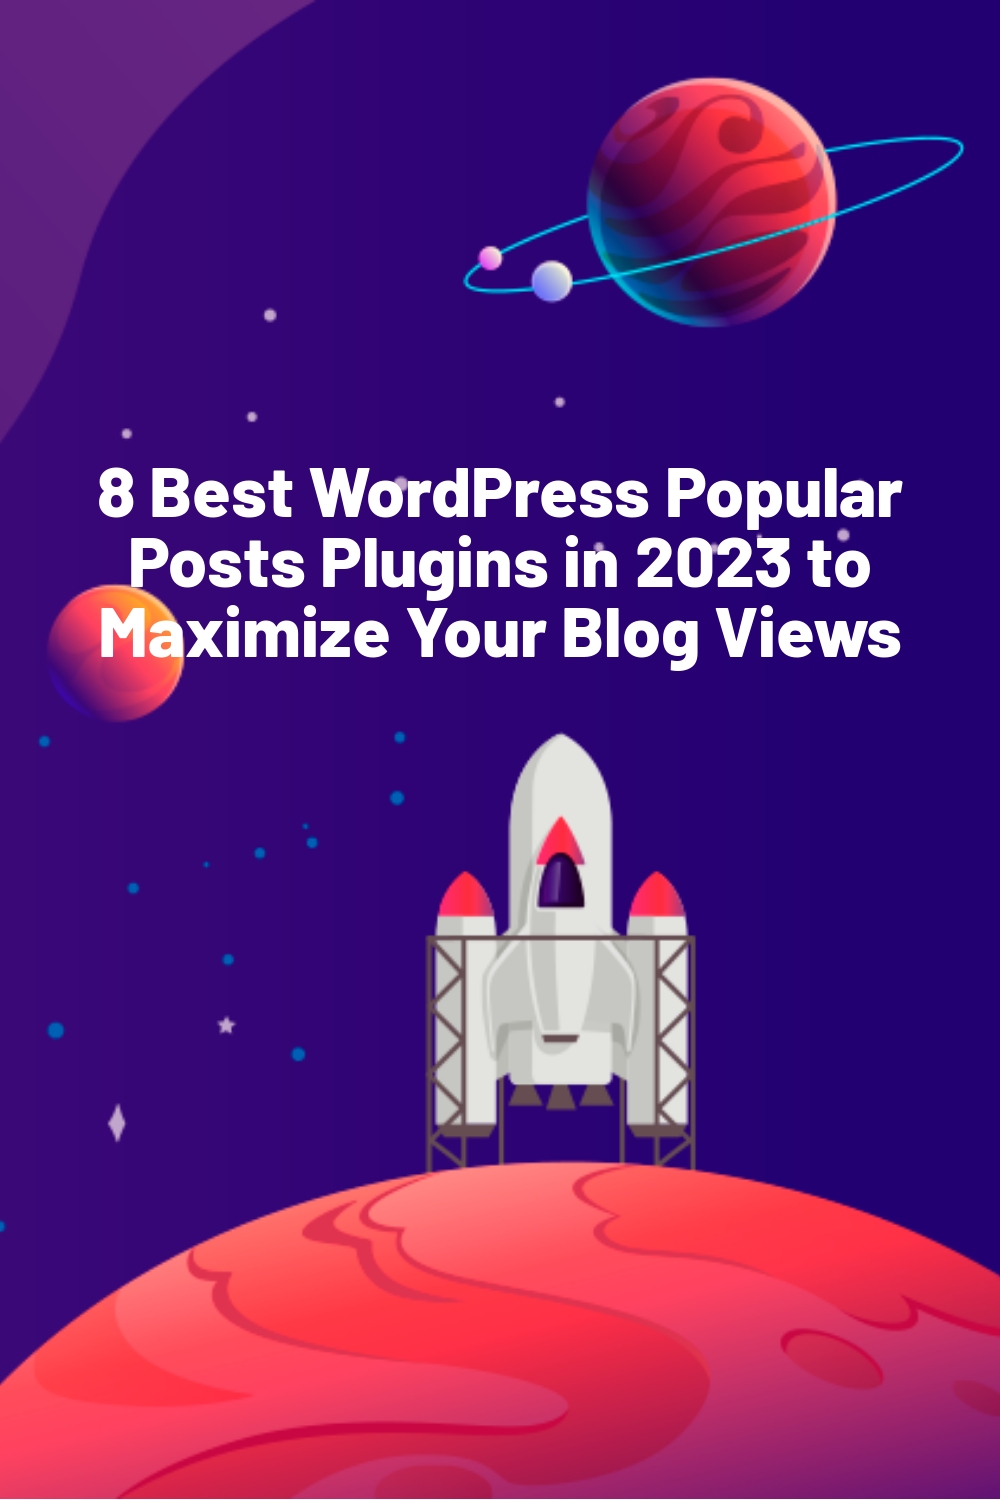 8 Best WordPress Popular Posts Plugins in 2023 to Maximize Your Blog Views